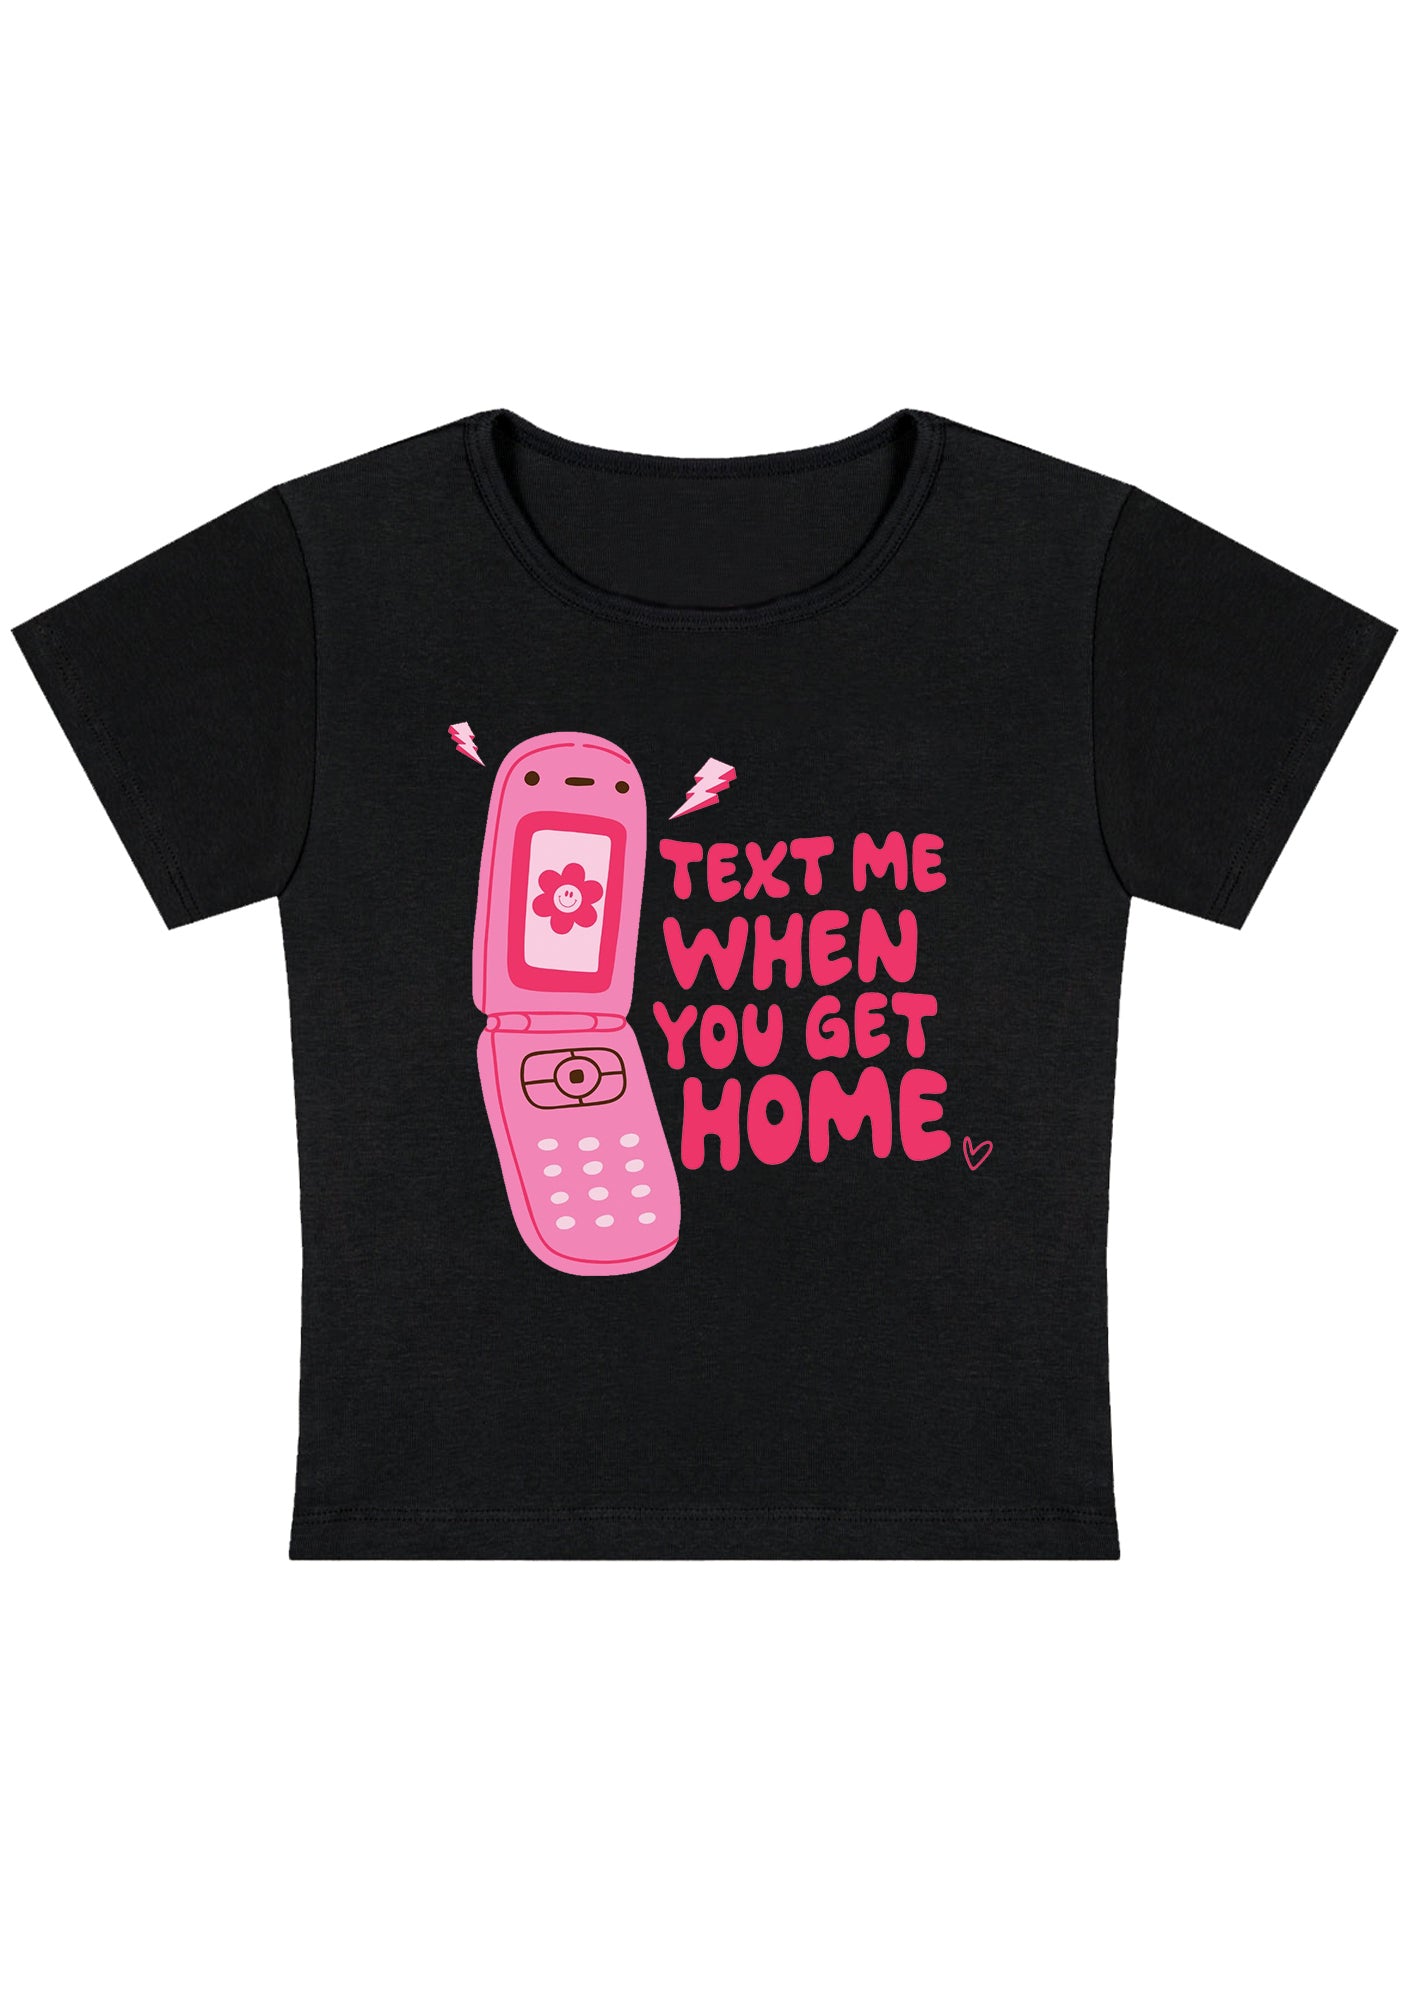 Text Me When You Get Home Y2K Baby Tee